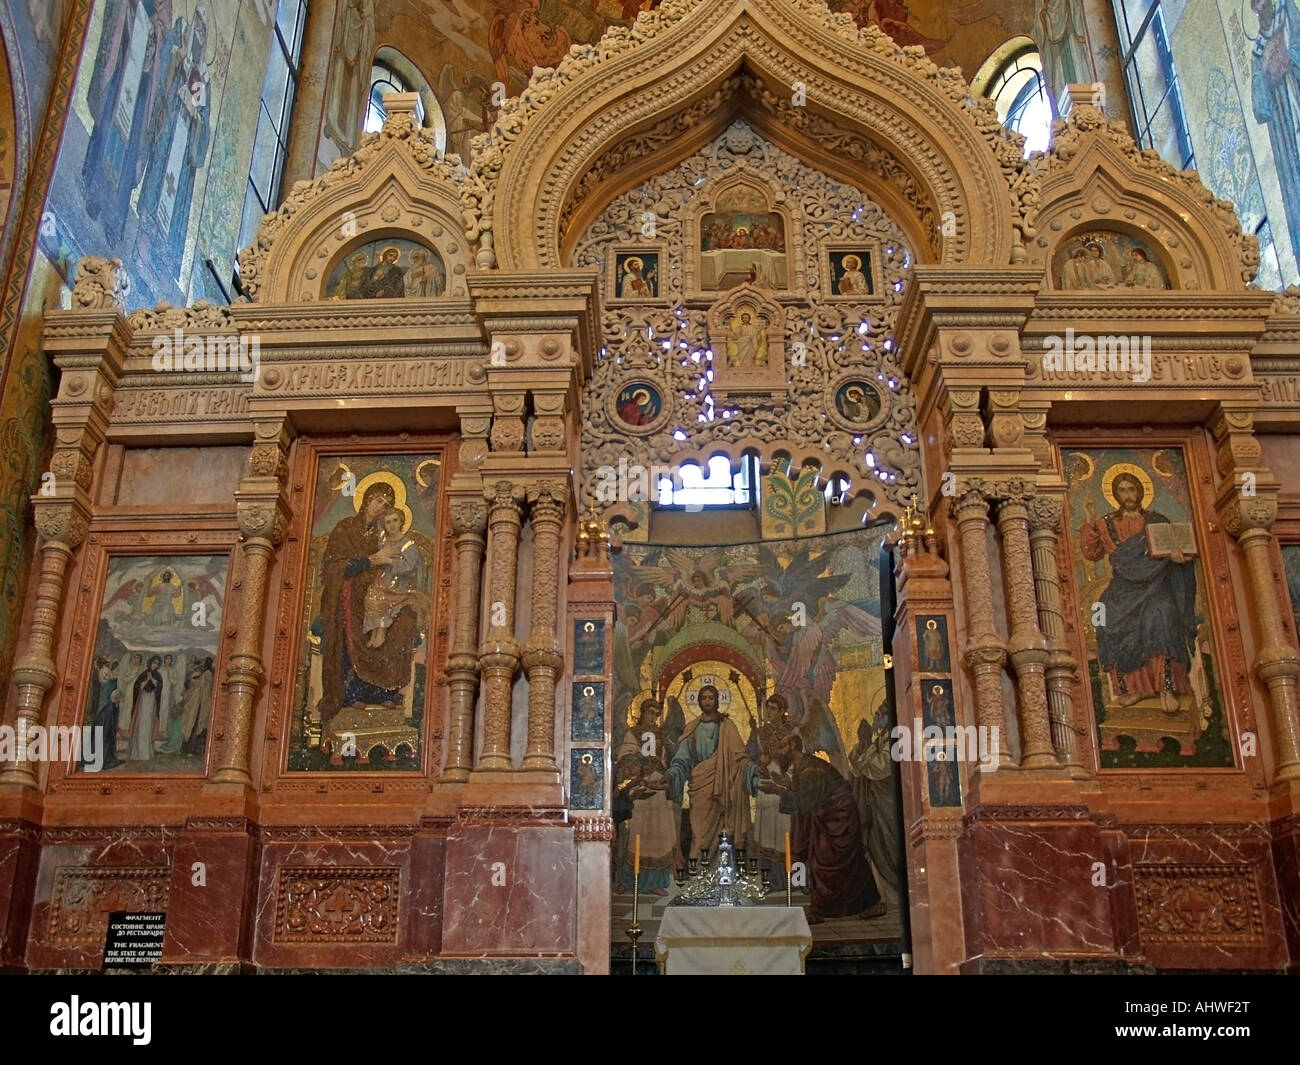 icons frescoes and mosaics in the interior of the Church of the Savior on Spilled Blood Church Stock Photo